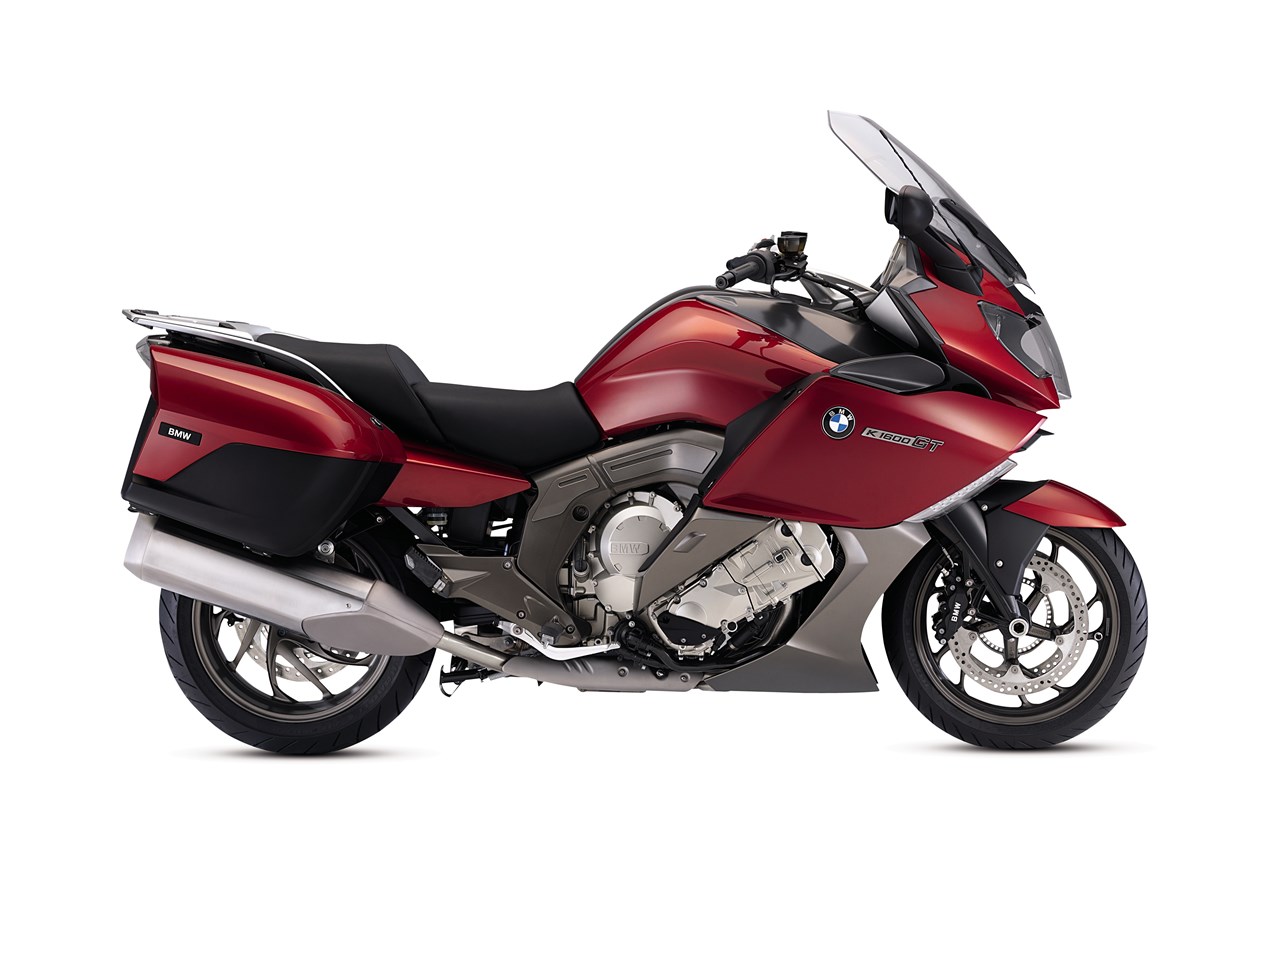 BMW K1600GT (2011-on) Review | Speed, Specs & Prices | MCN